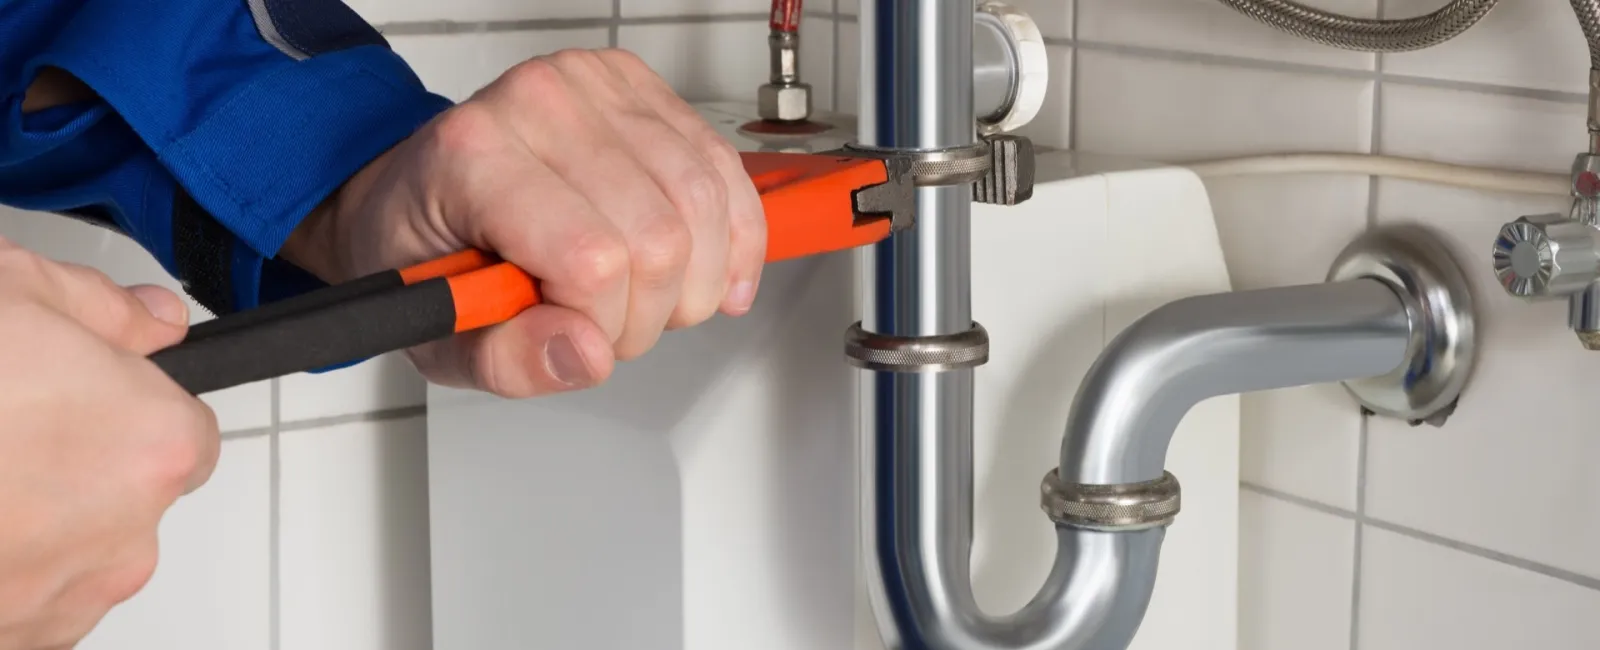 Quick kitchen plumbing repairs every homeowner should know